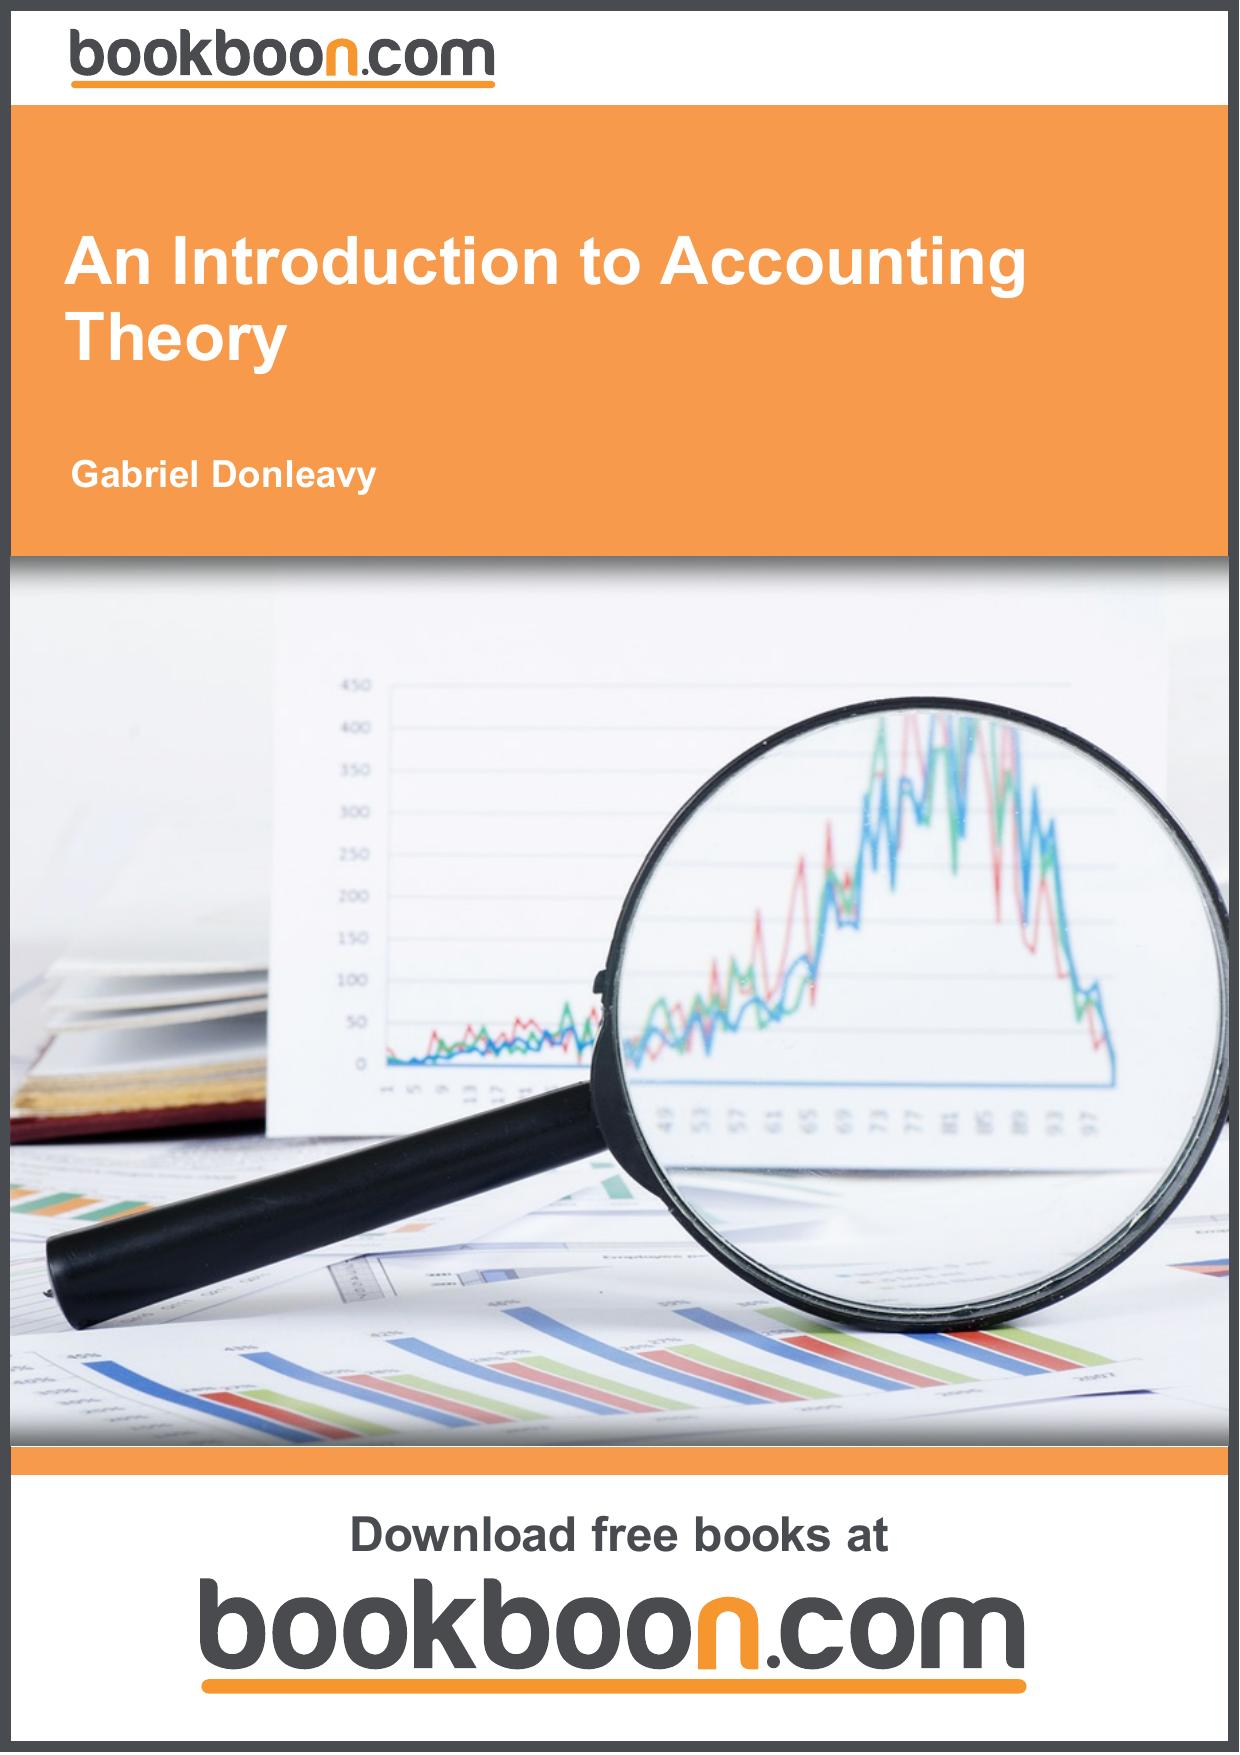 An Introduction to Accounting Theory 2016